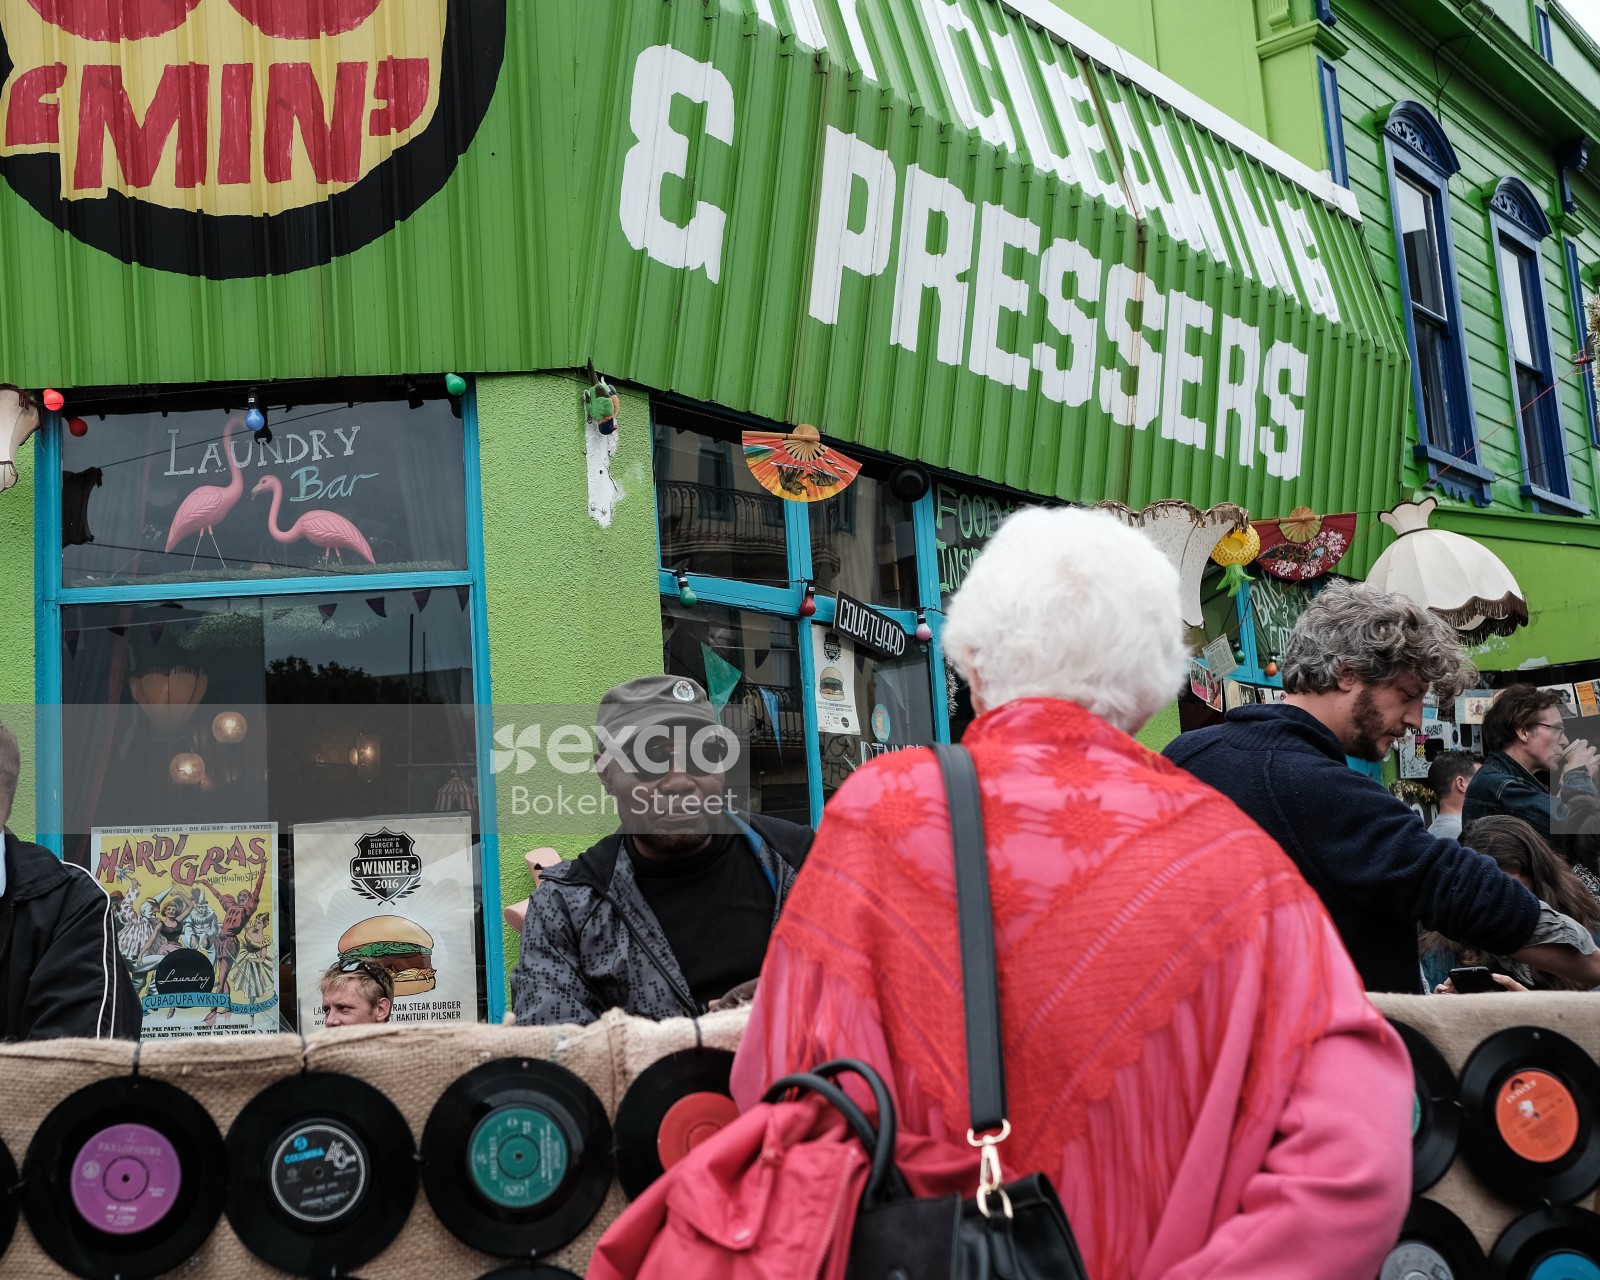 Old woman wearing a pink coat looking at vinyls